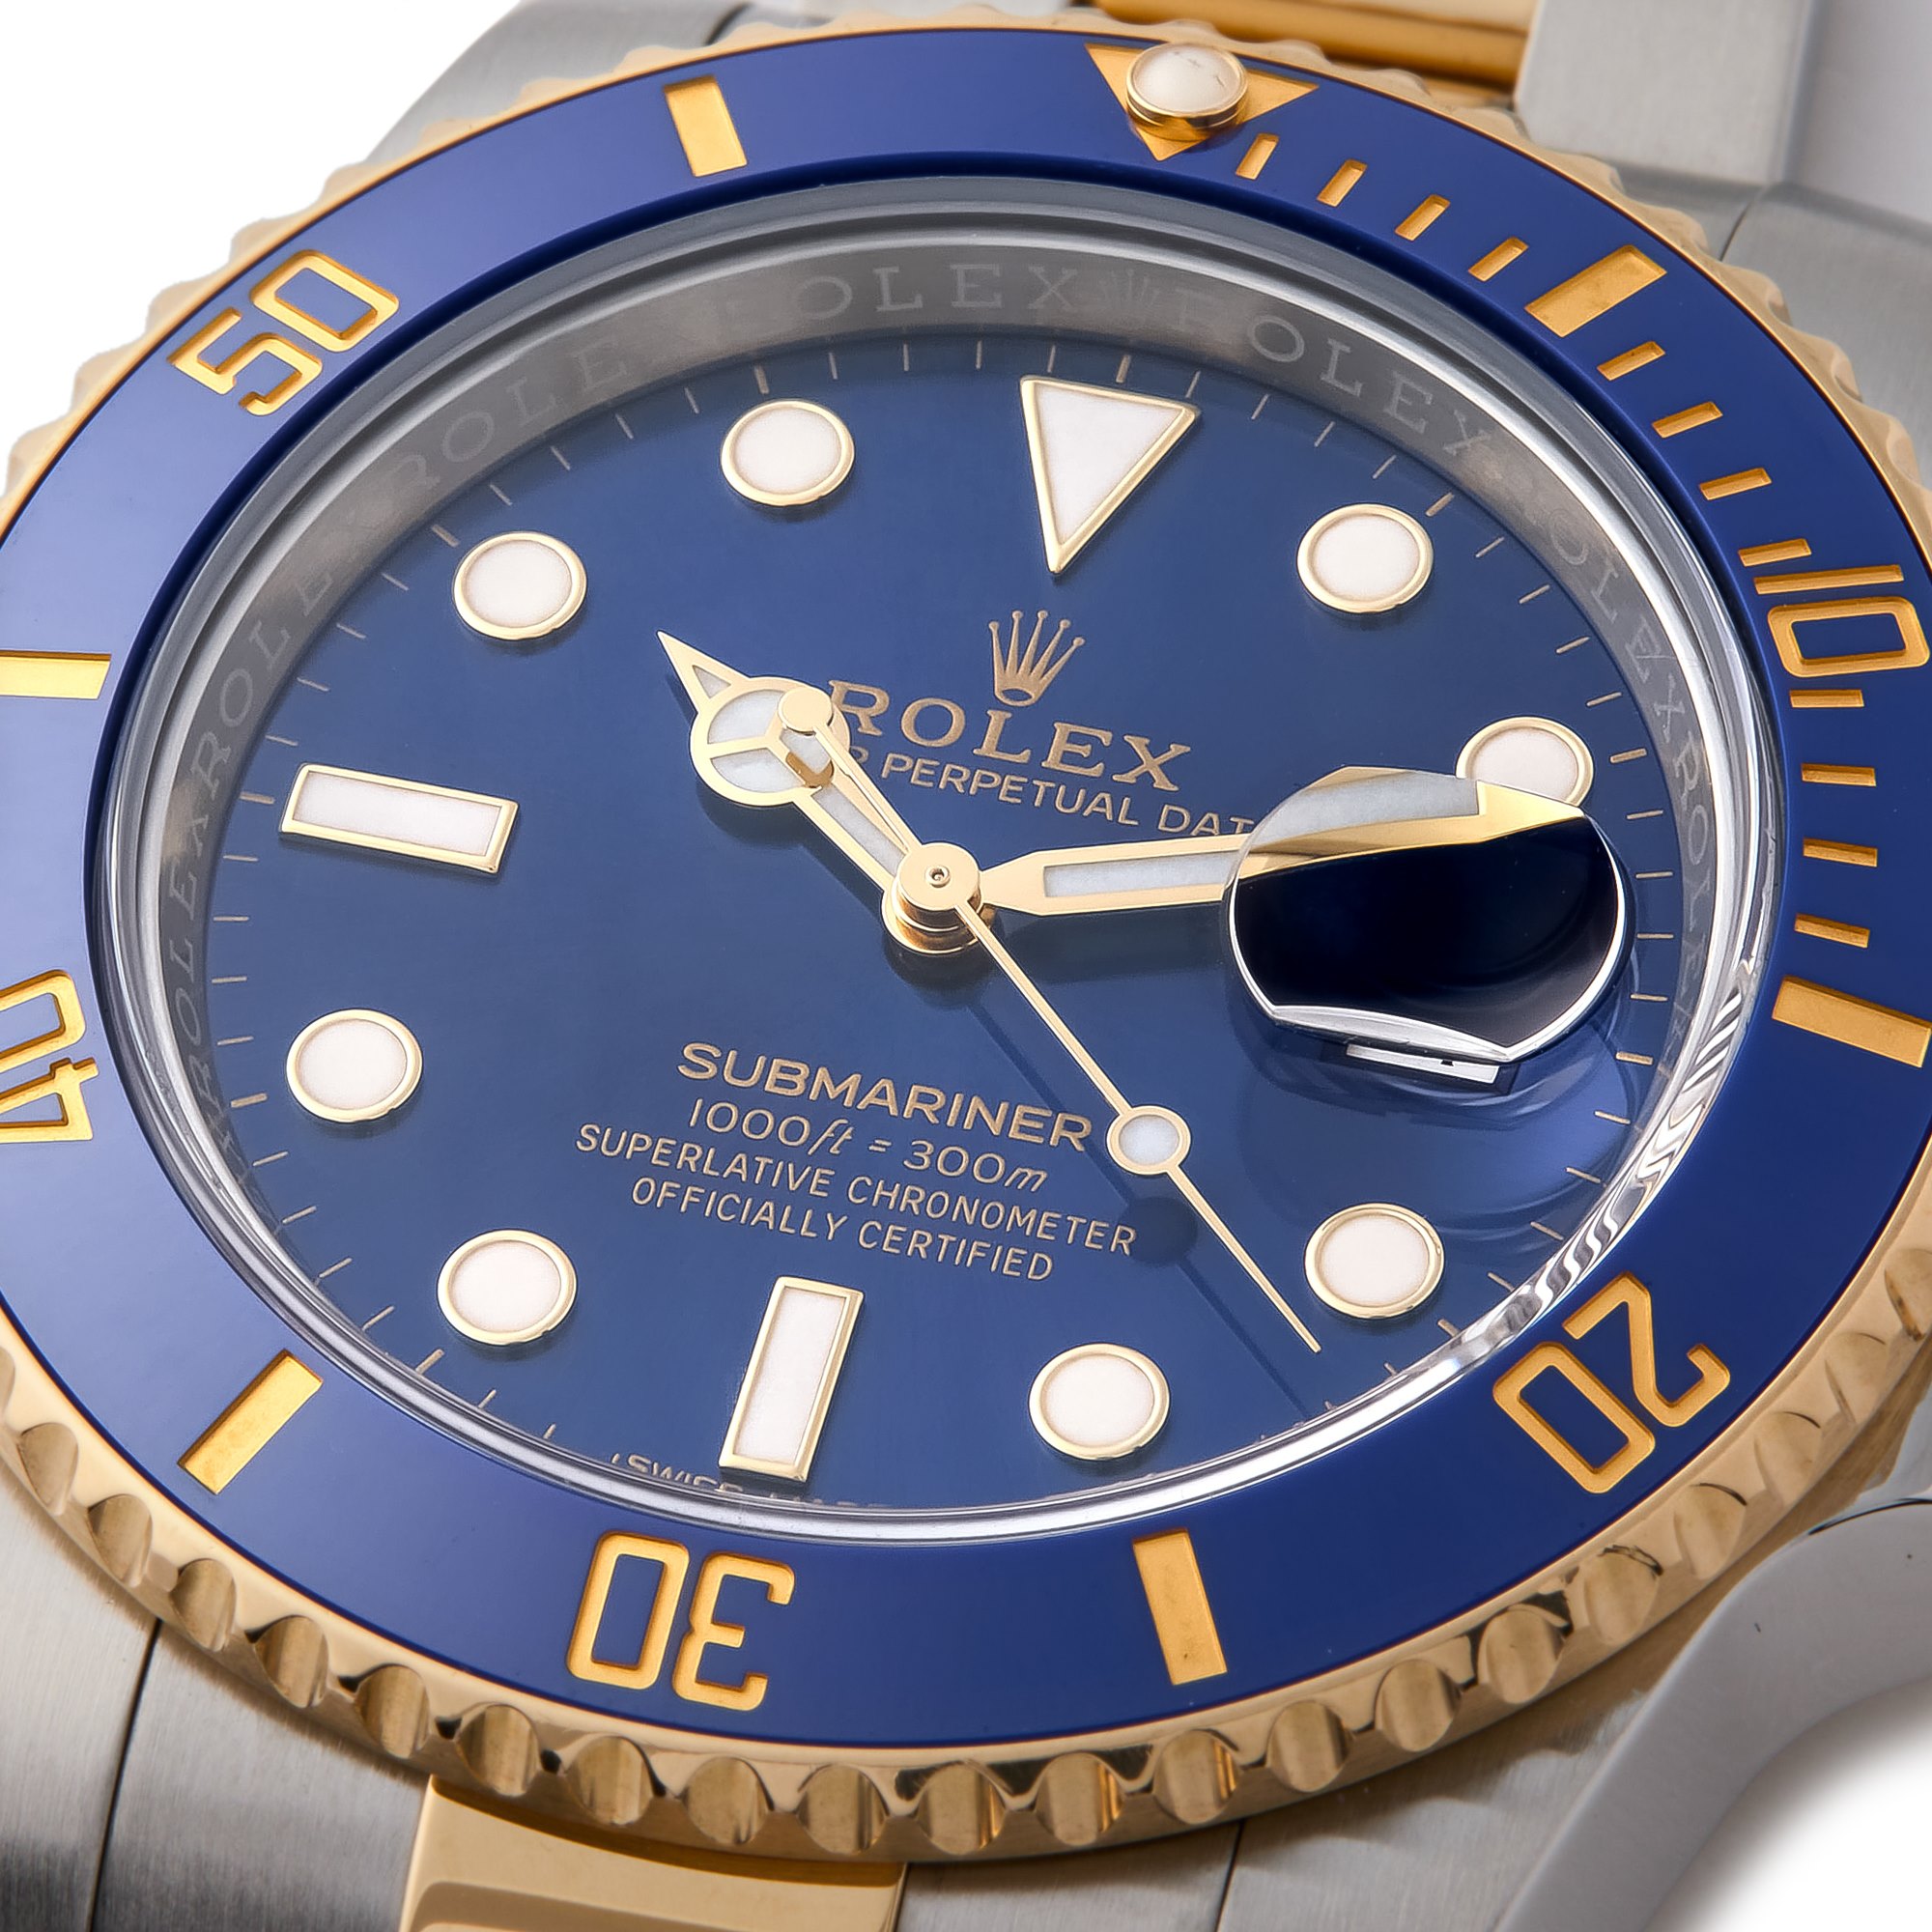 Rolex Submariner Date Stainless Steel 116613LB